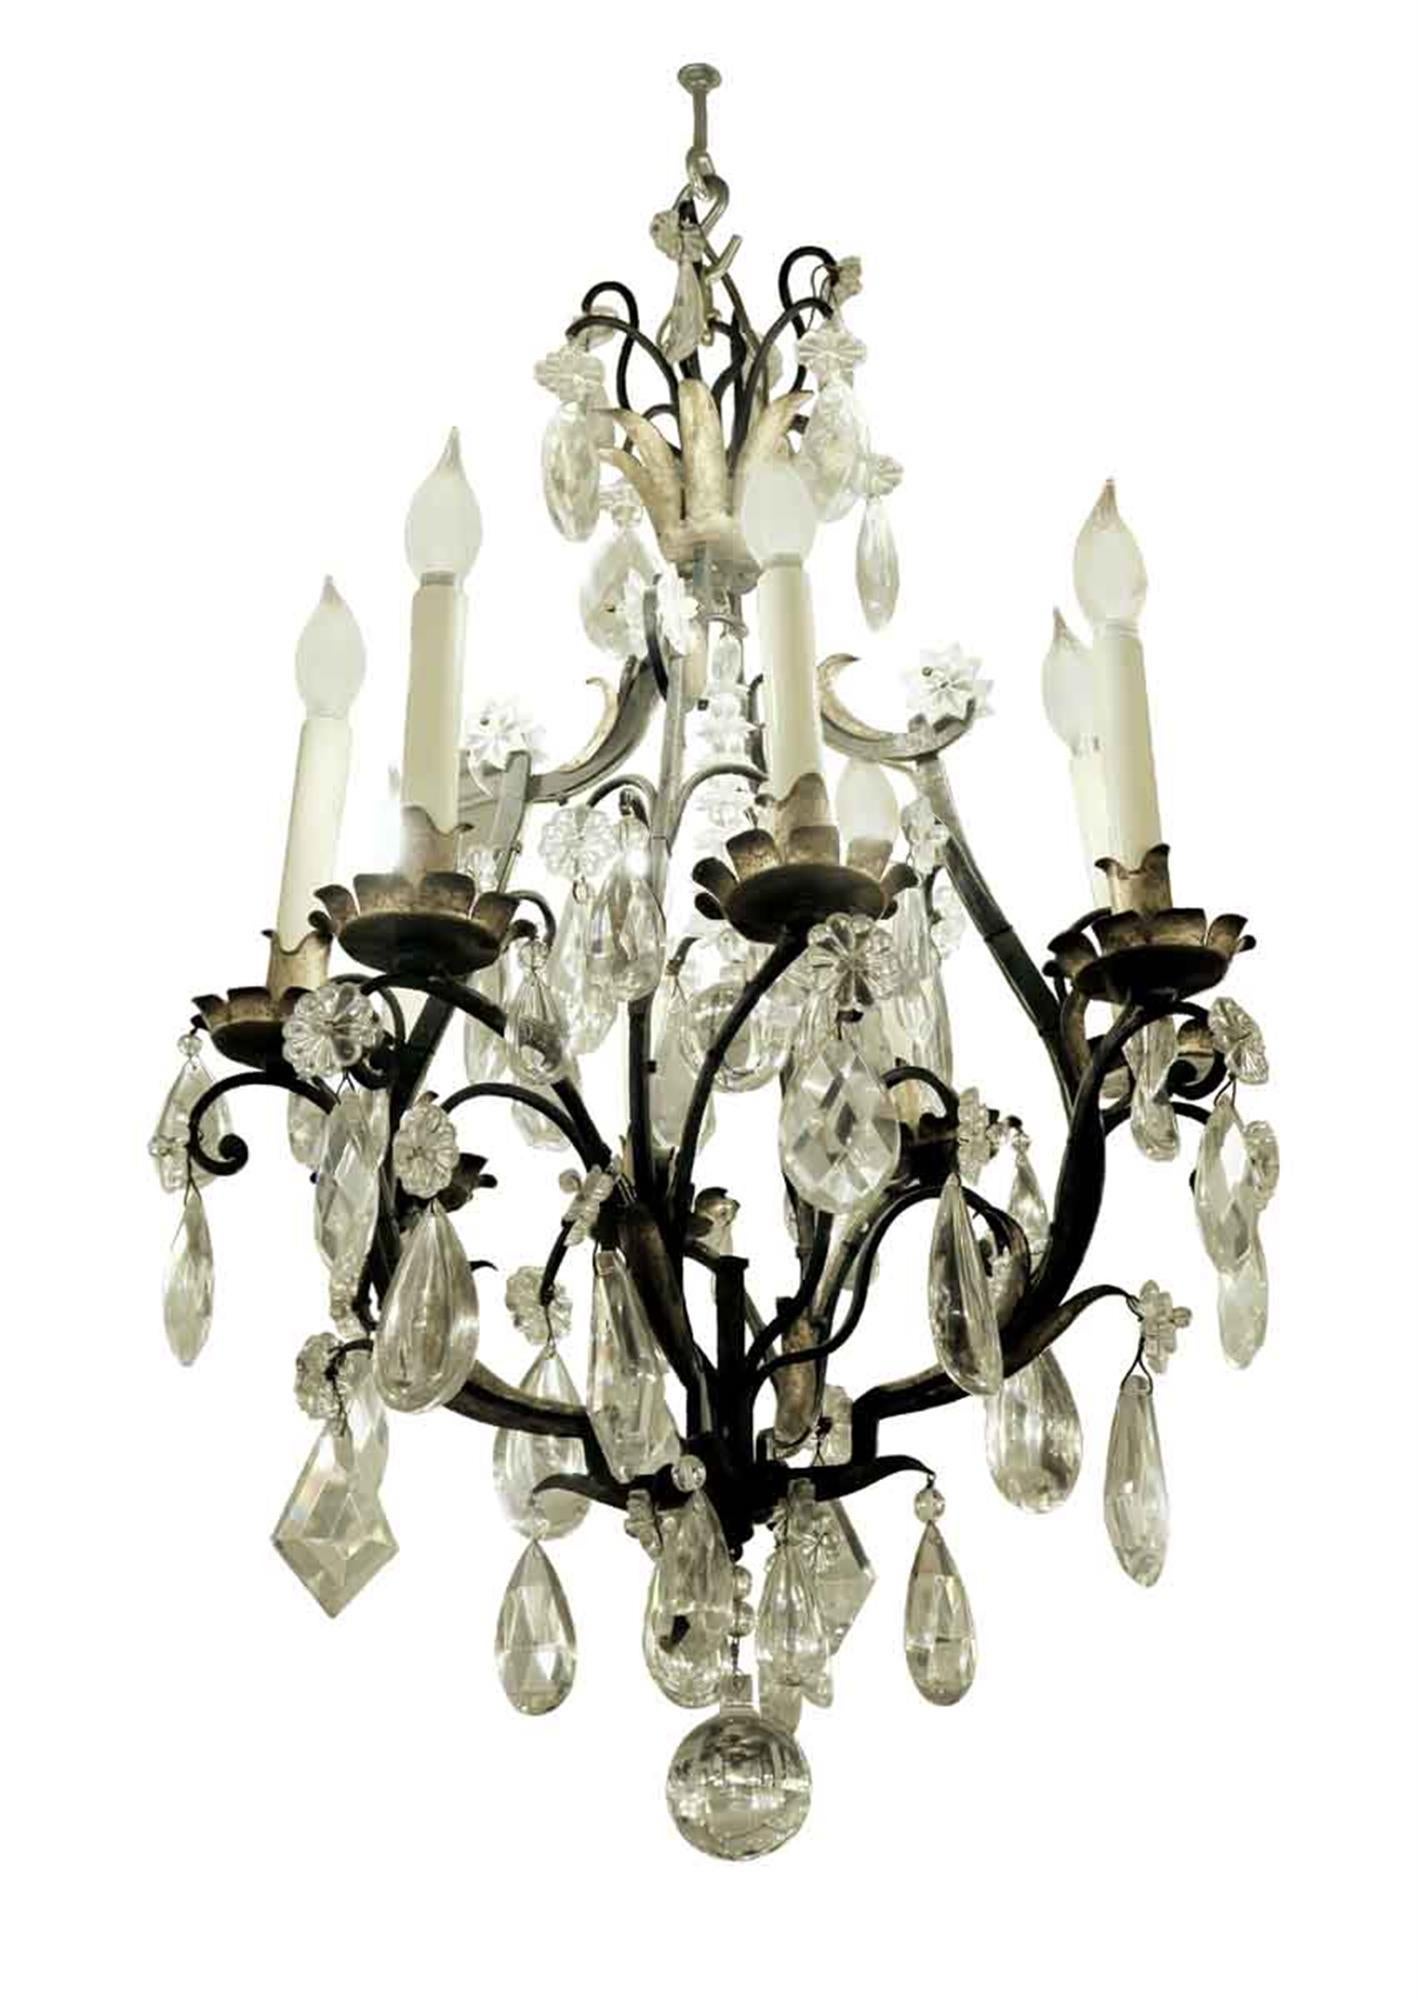 Venetian style iron six arm chandelier with gilded gold leafed metal details and heavy cut crystals from the 1940s. Cleaned and rewired. Please note, this item is located in one of our NYC locations.